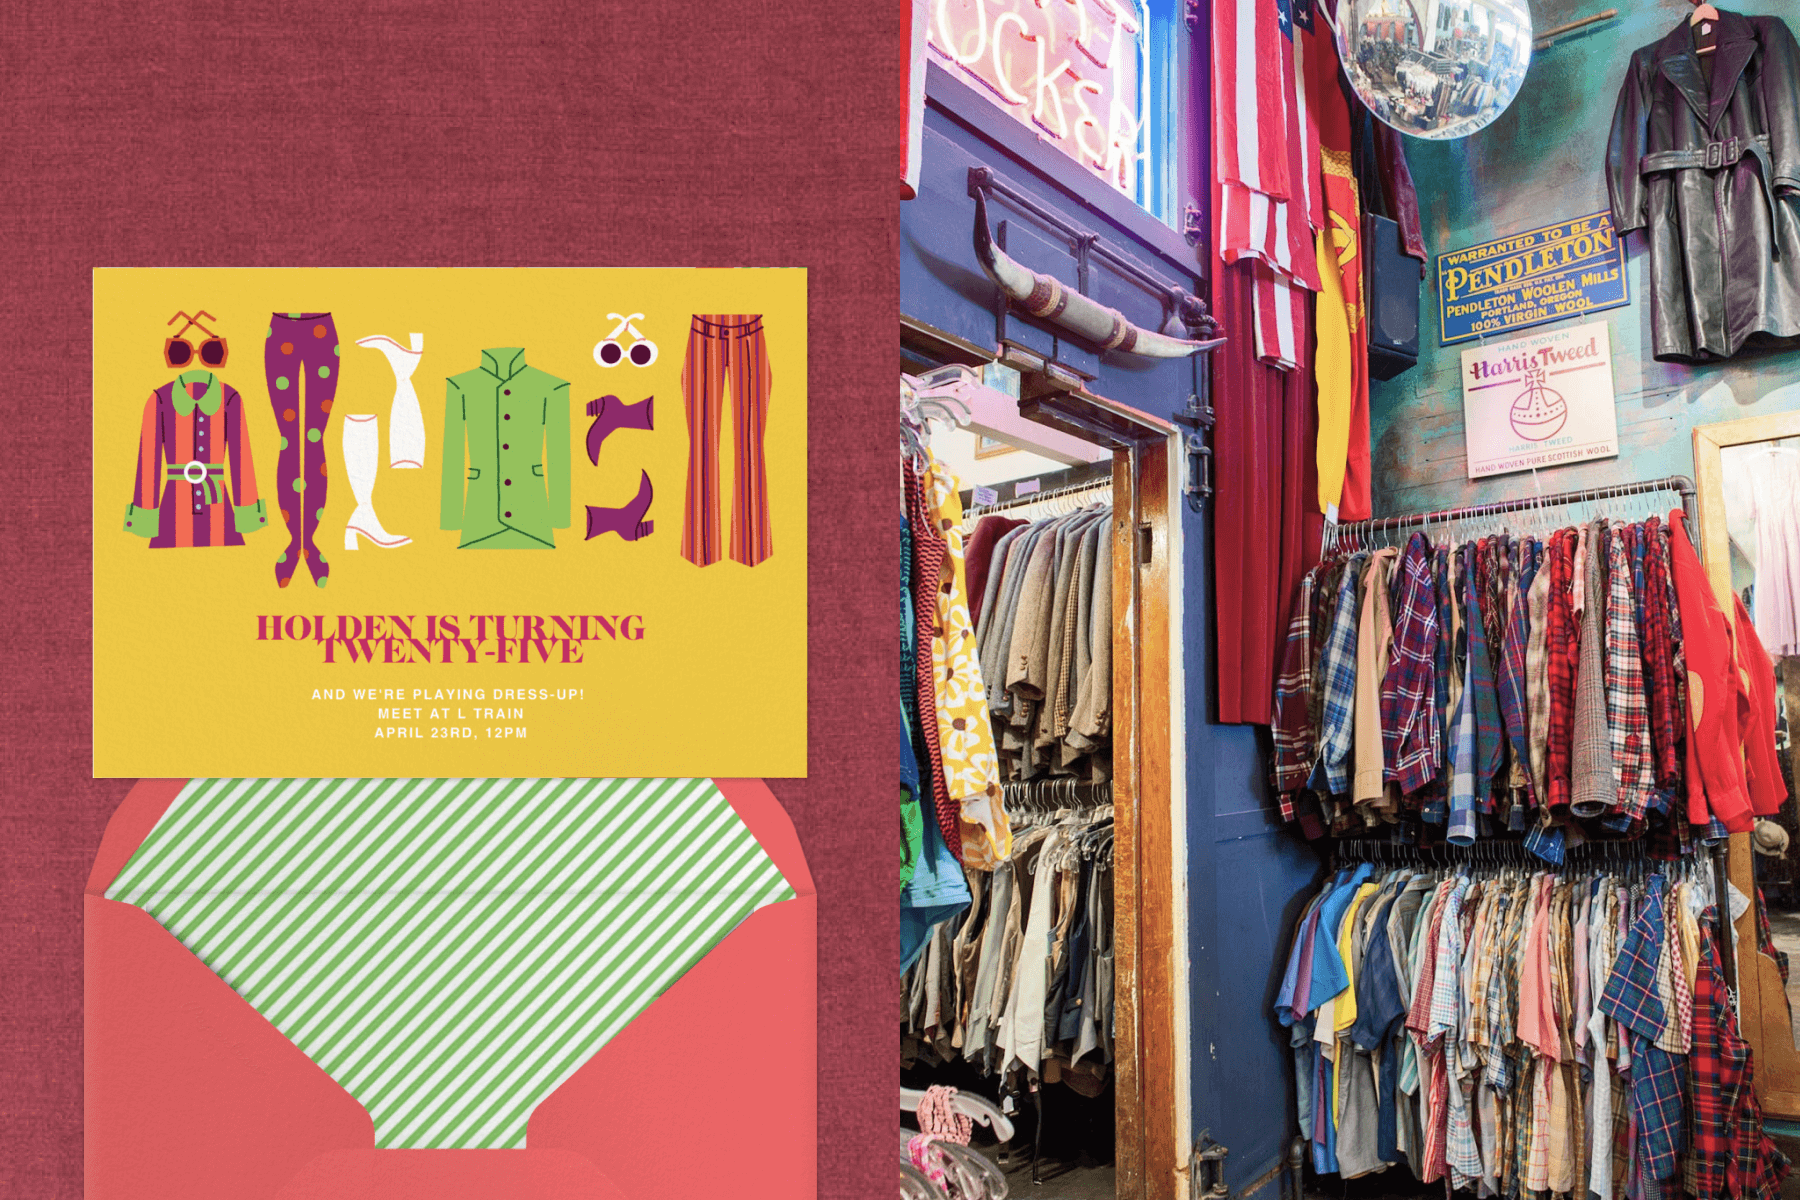 Left: A yellow 25th birthday party invitation with colorful illustrations of 1960s-style clothing, like a striped coat, large sunglasses, white boots, and striped pants on a red backdrop. Right: The colorful interior of a vintage clothing store with shirts hanging on wall racks.